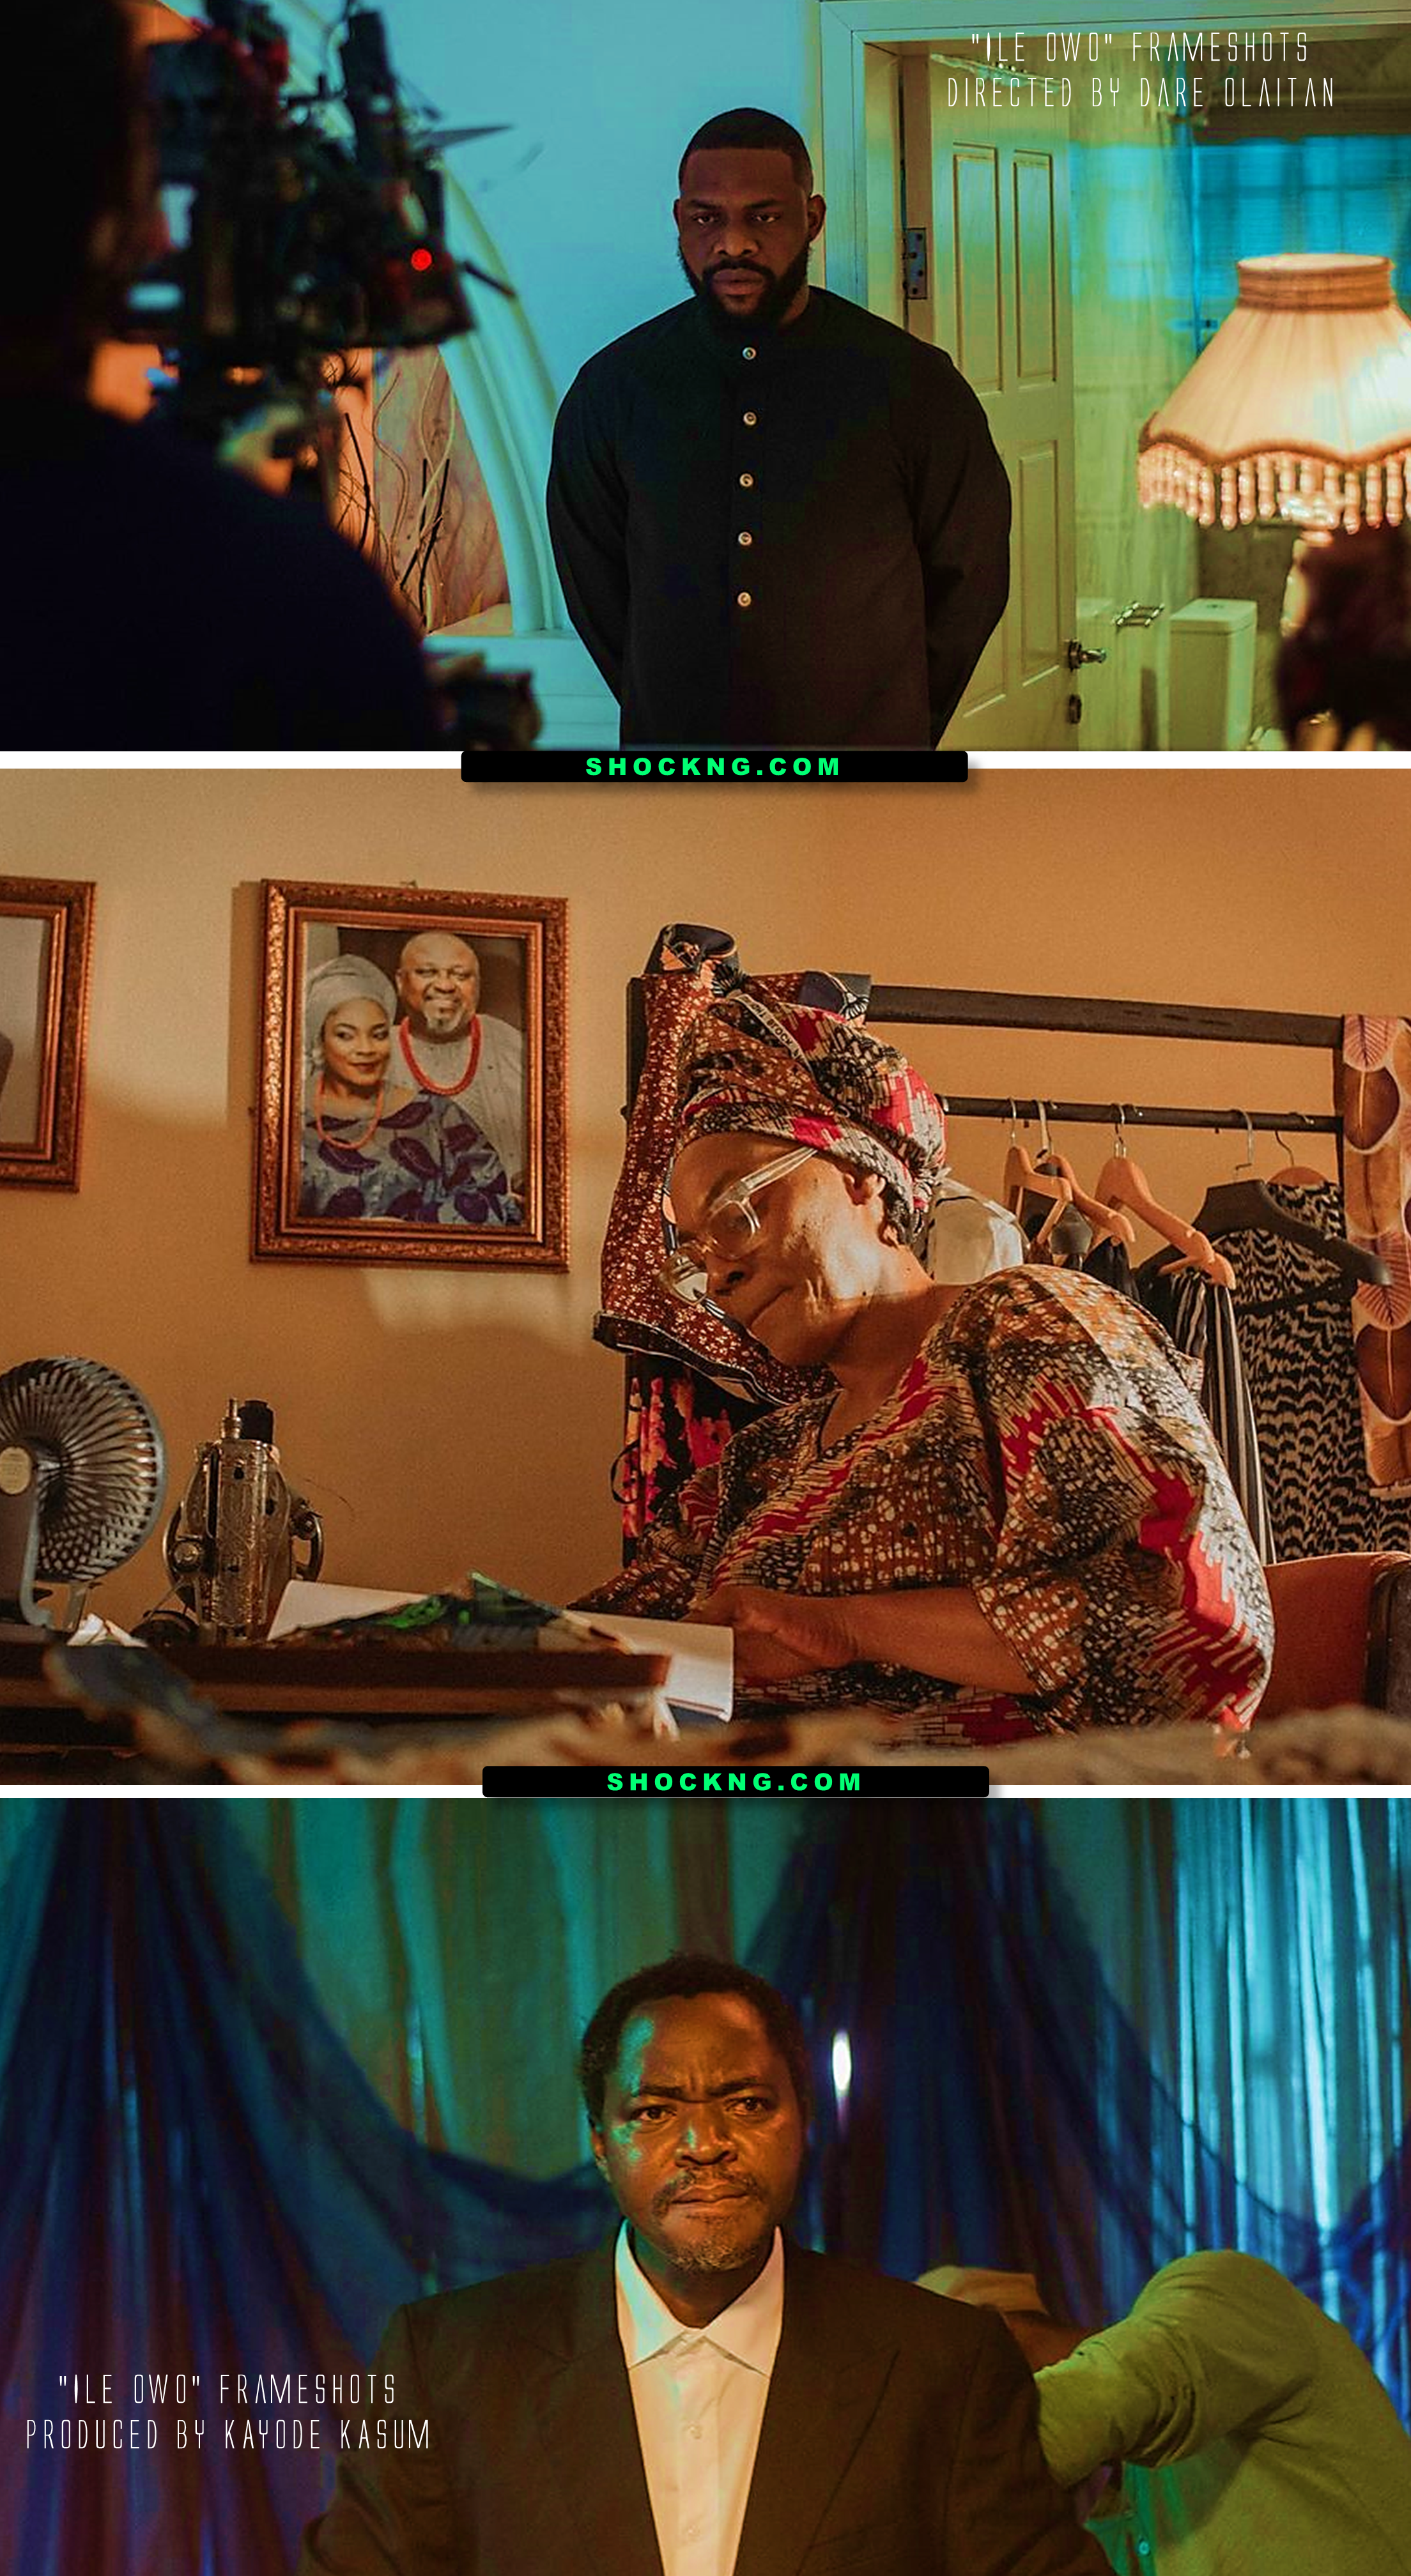 Ile Owo Horror frame shots directed by dare olaitan and kayode kasum - Dare Olaitan On The Revival Of Nollywood Monsters, Making His Horror Debut and His Growth as a Filmmaker